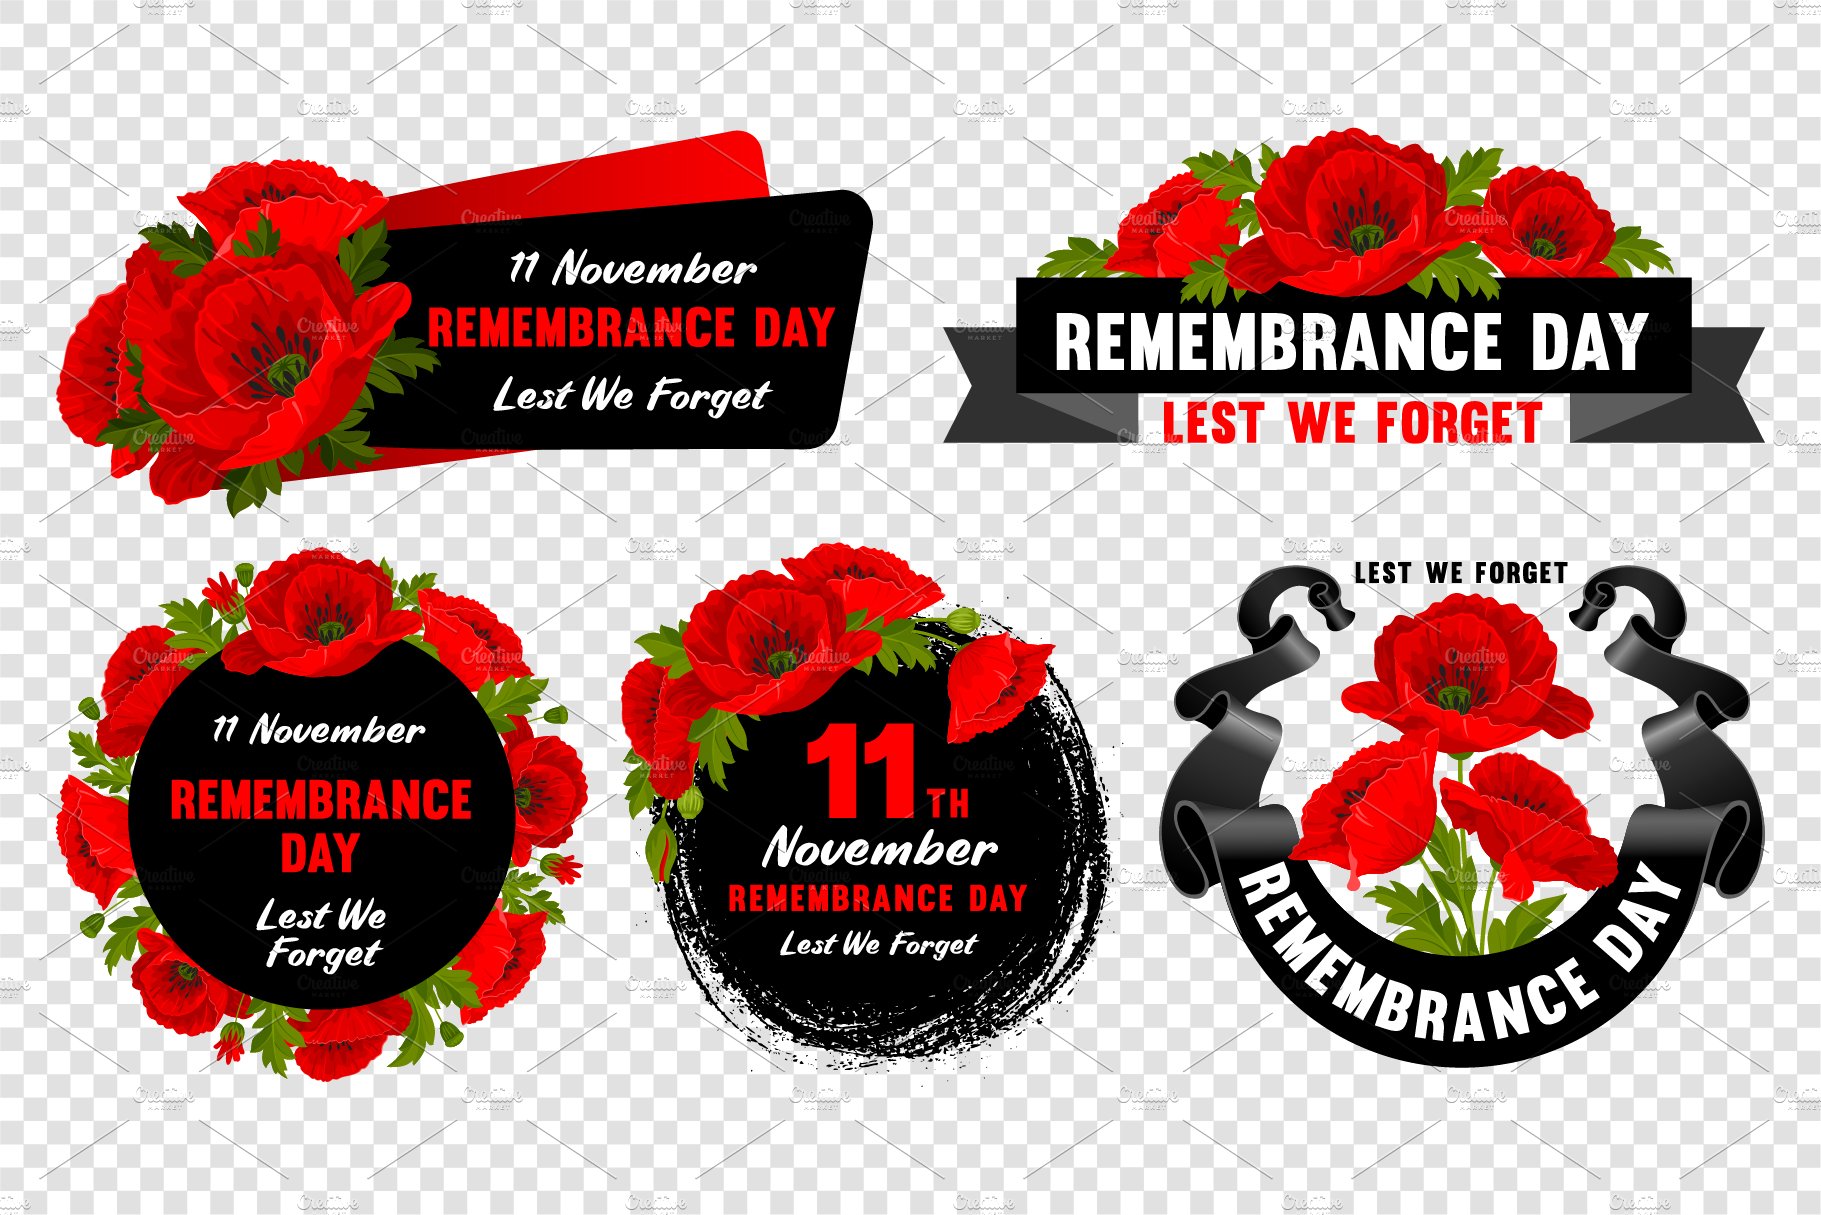 Remembrance Day Set preview image.